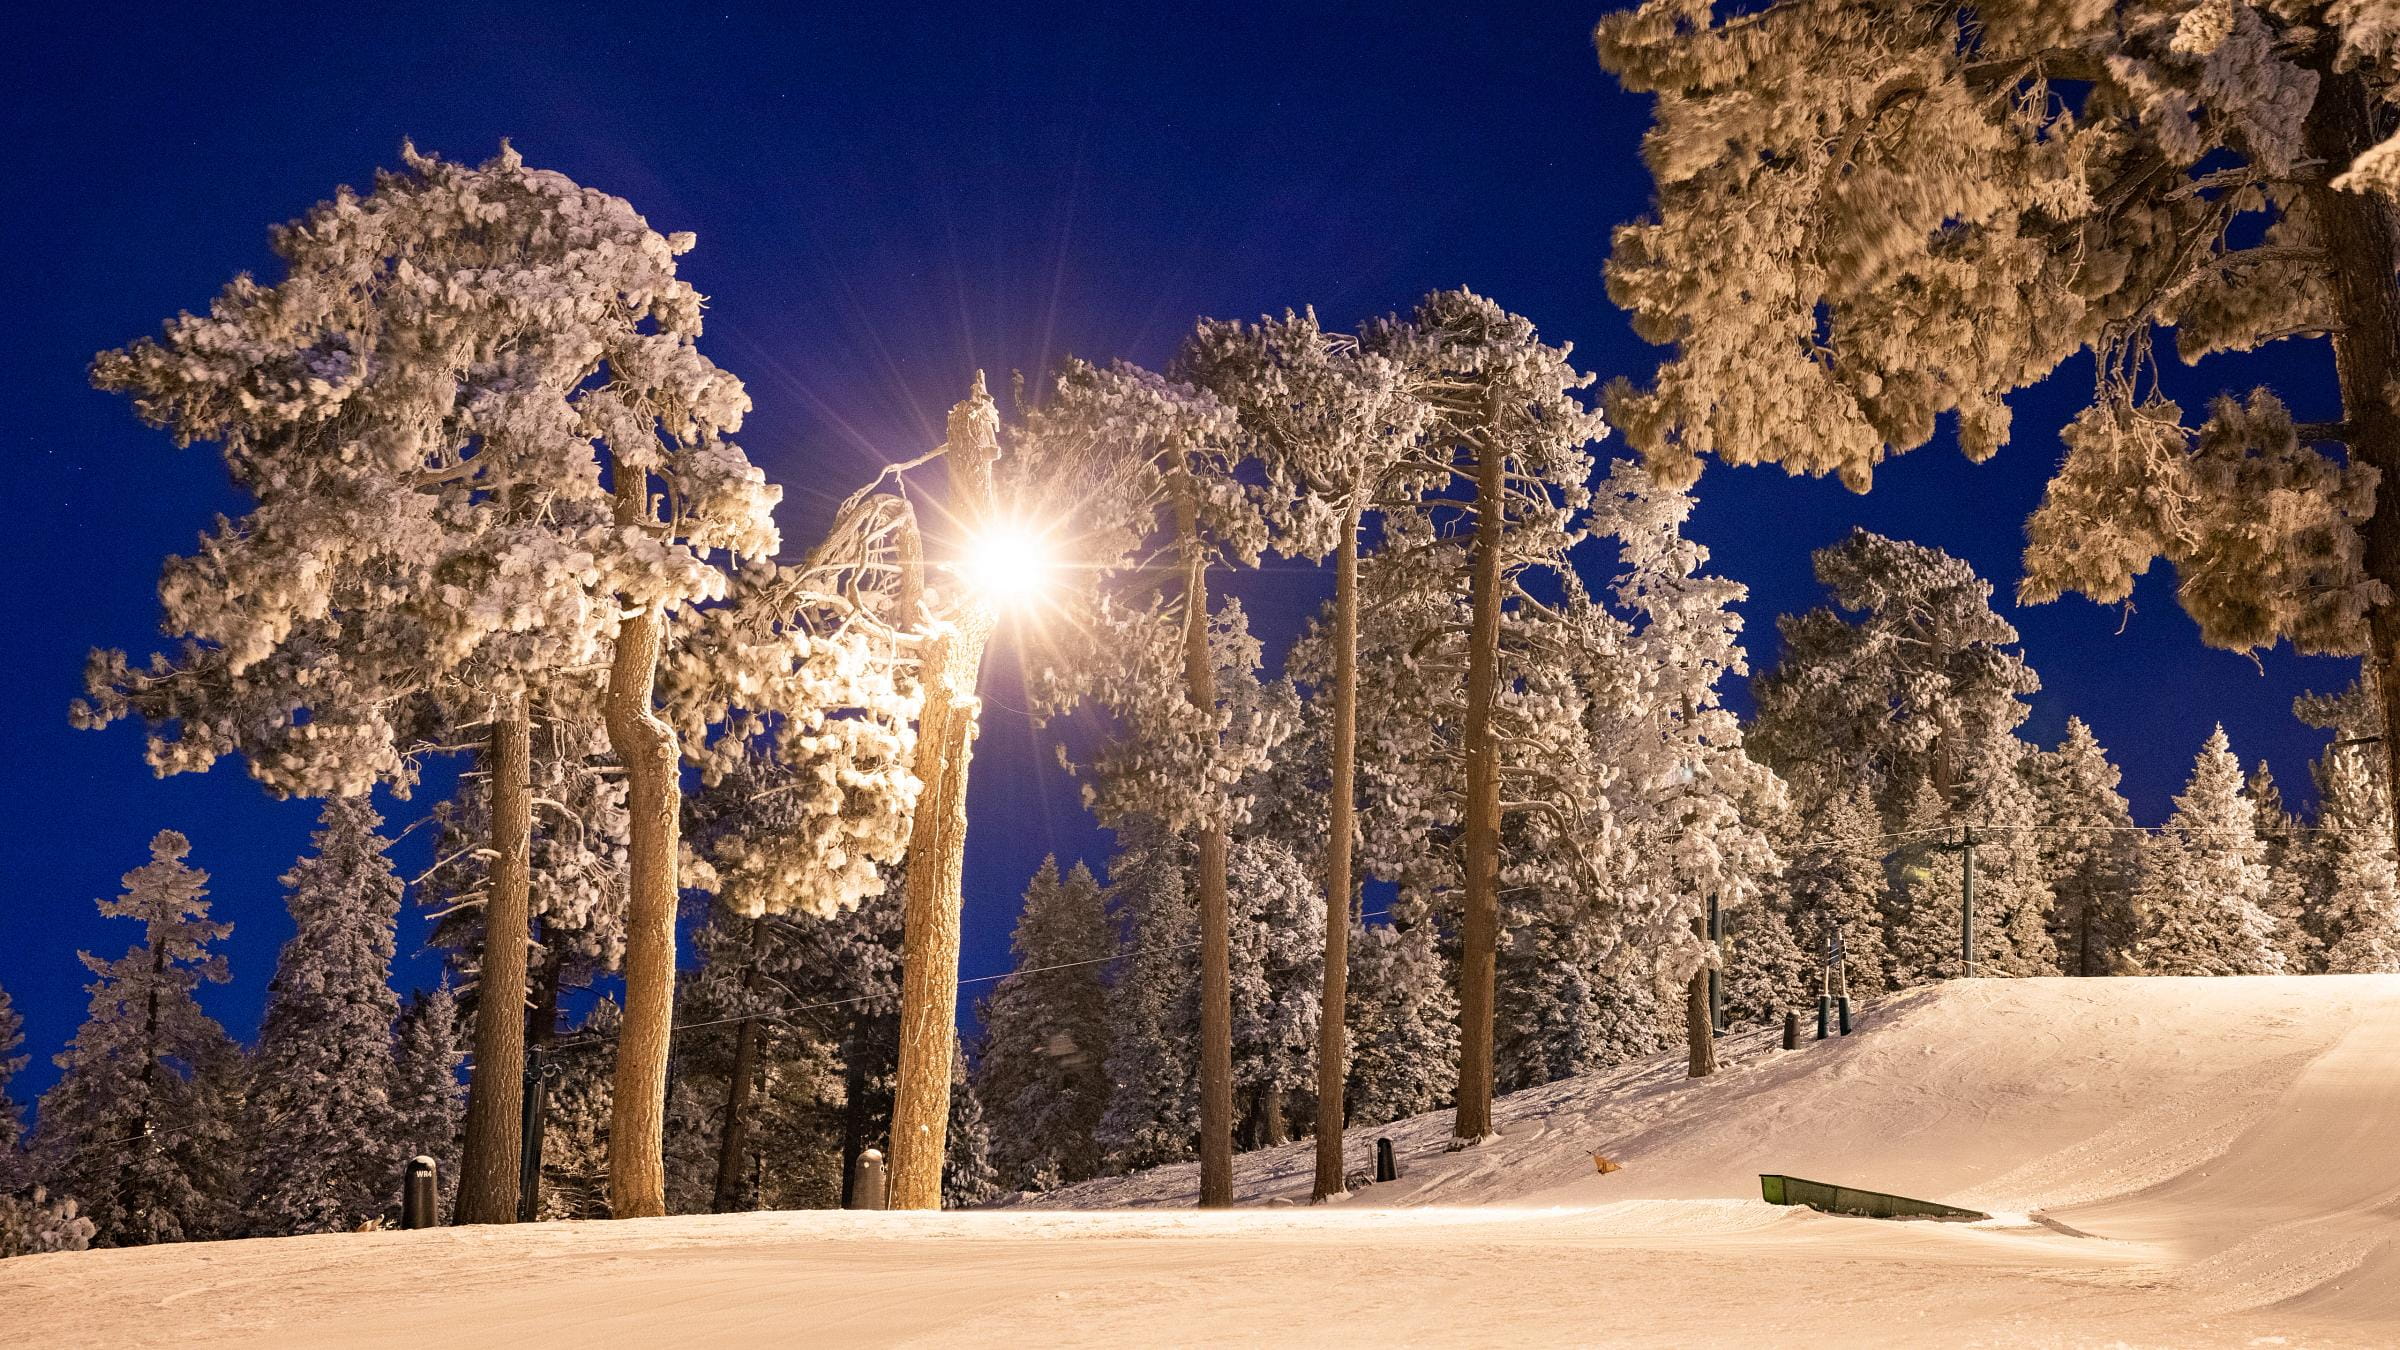 snowy trees in the evening on the slopes.